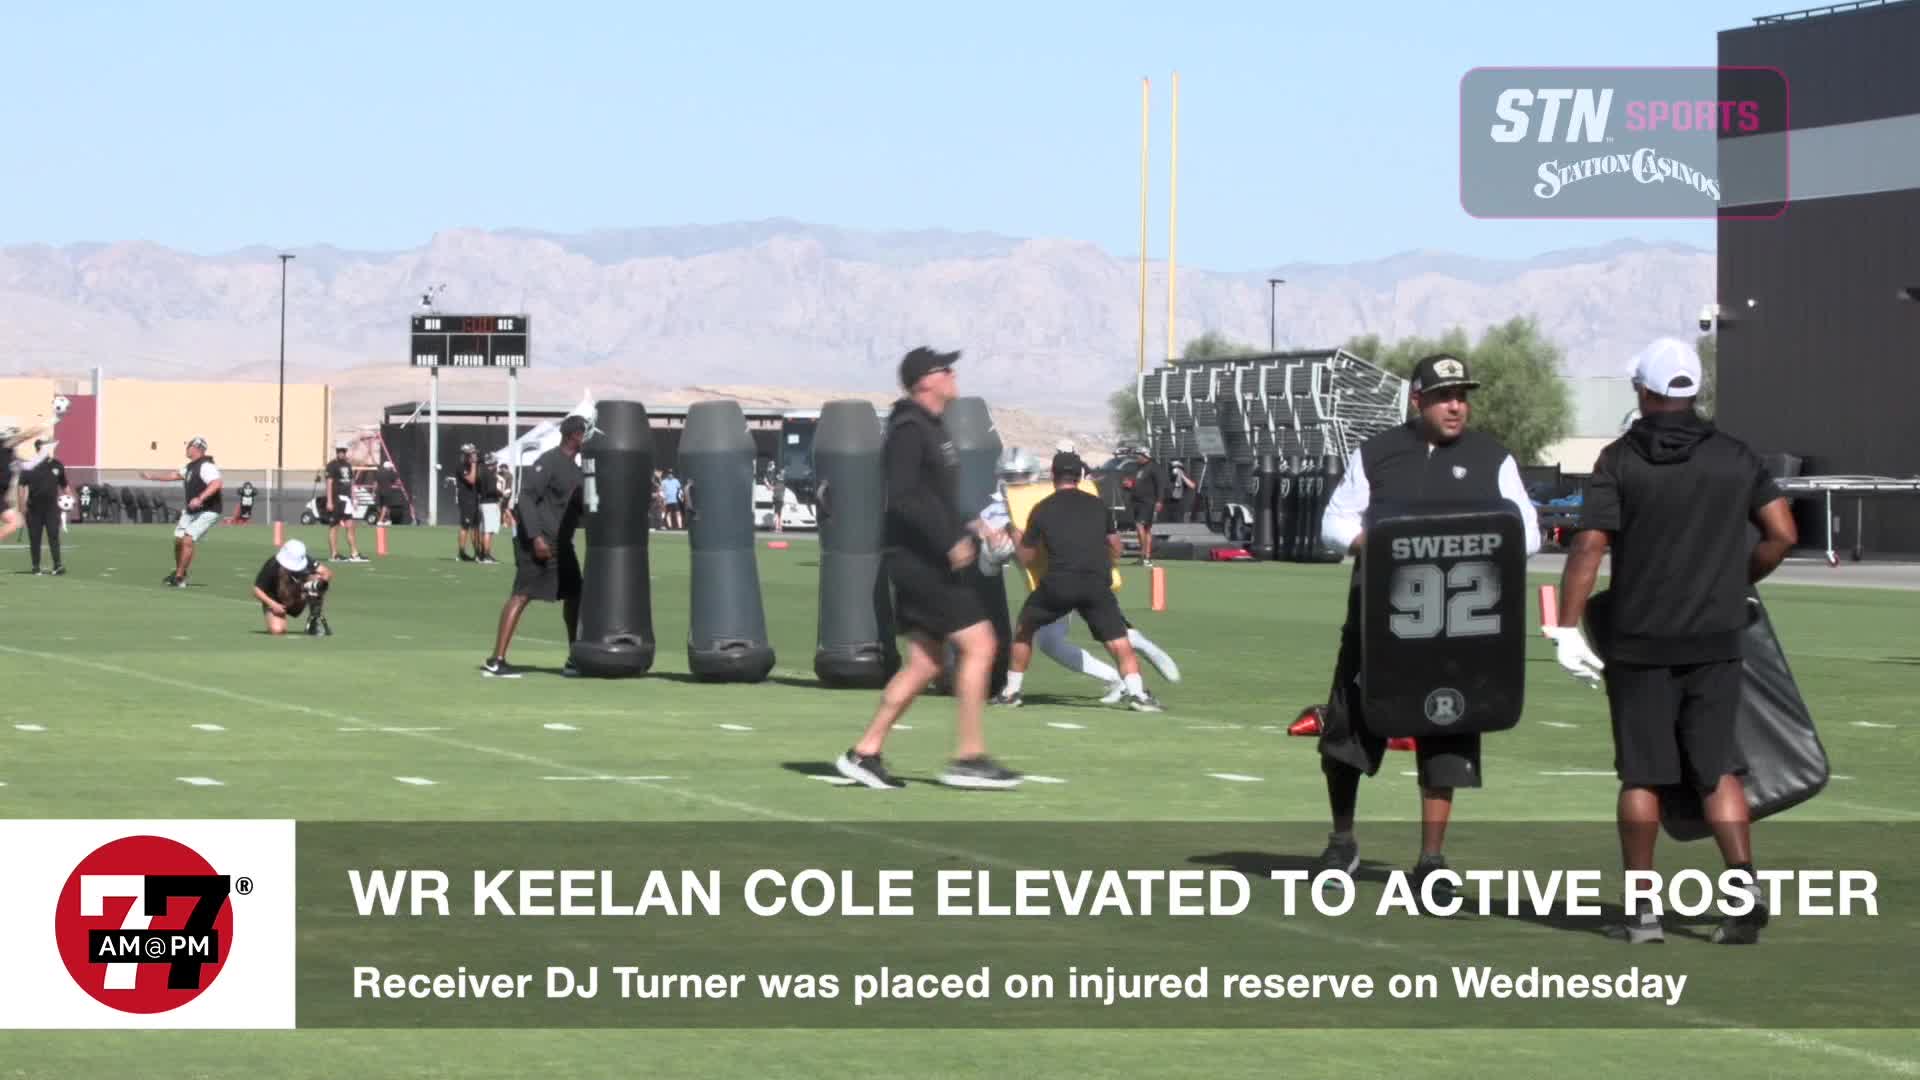 Keelan Cole elevated to active roster